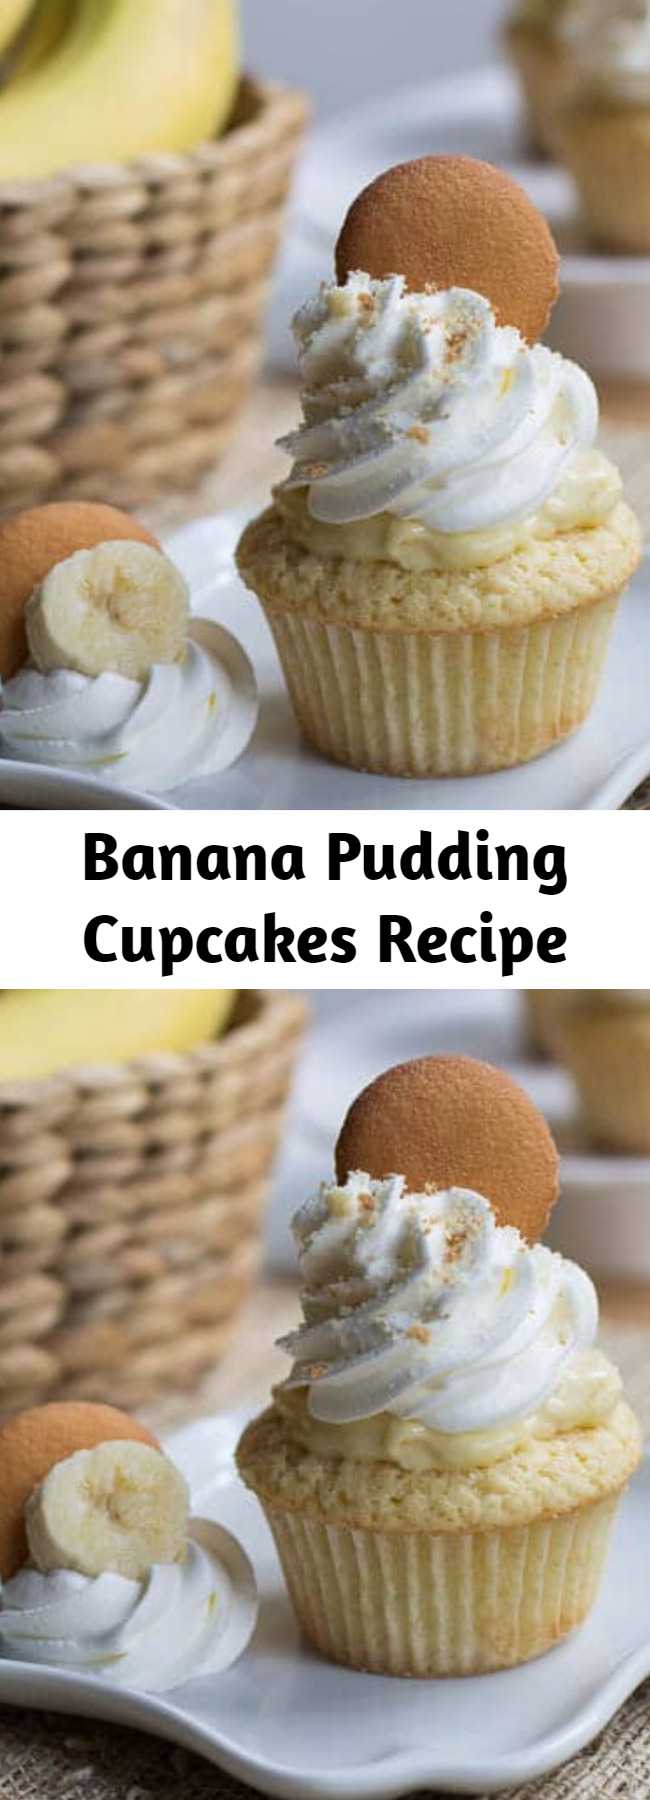 Banana Pudding Cupcakes Recipe - The cupcake version of banana pudding with a creamy pudding center, whipped topping and crushed vanilla wafers. So cool, creamy, and dreamy your taste buds won’t know what hit them!